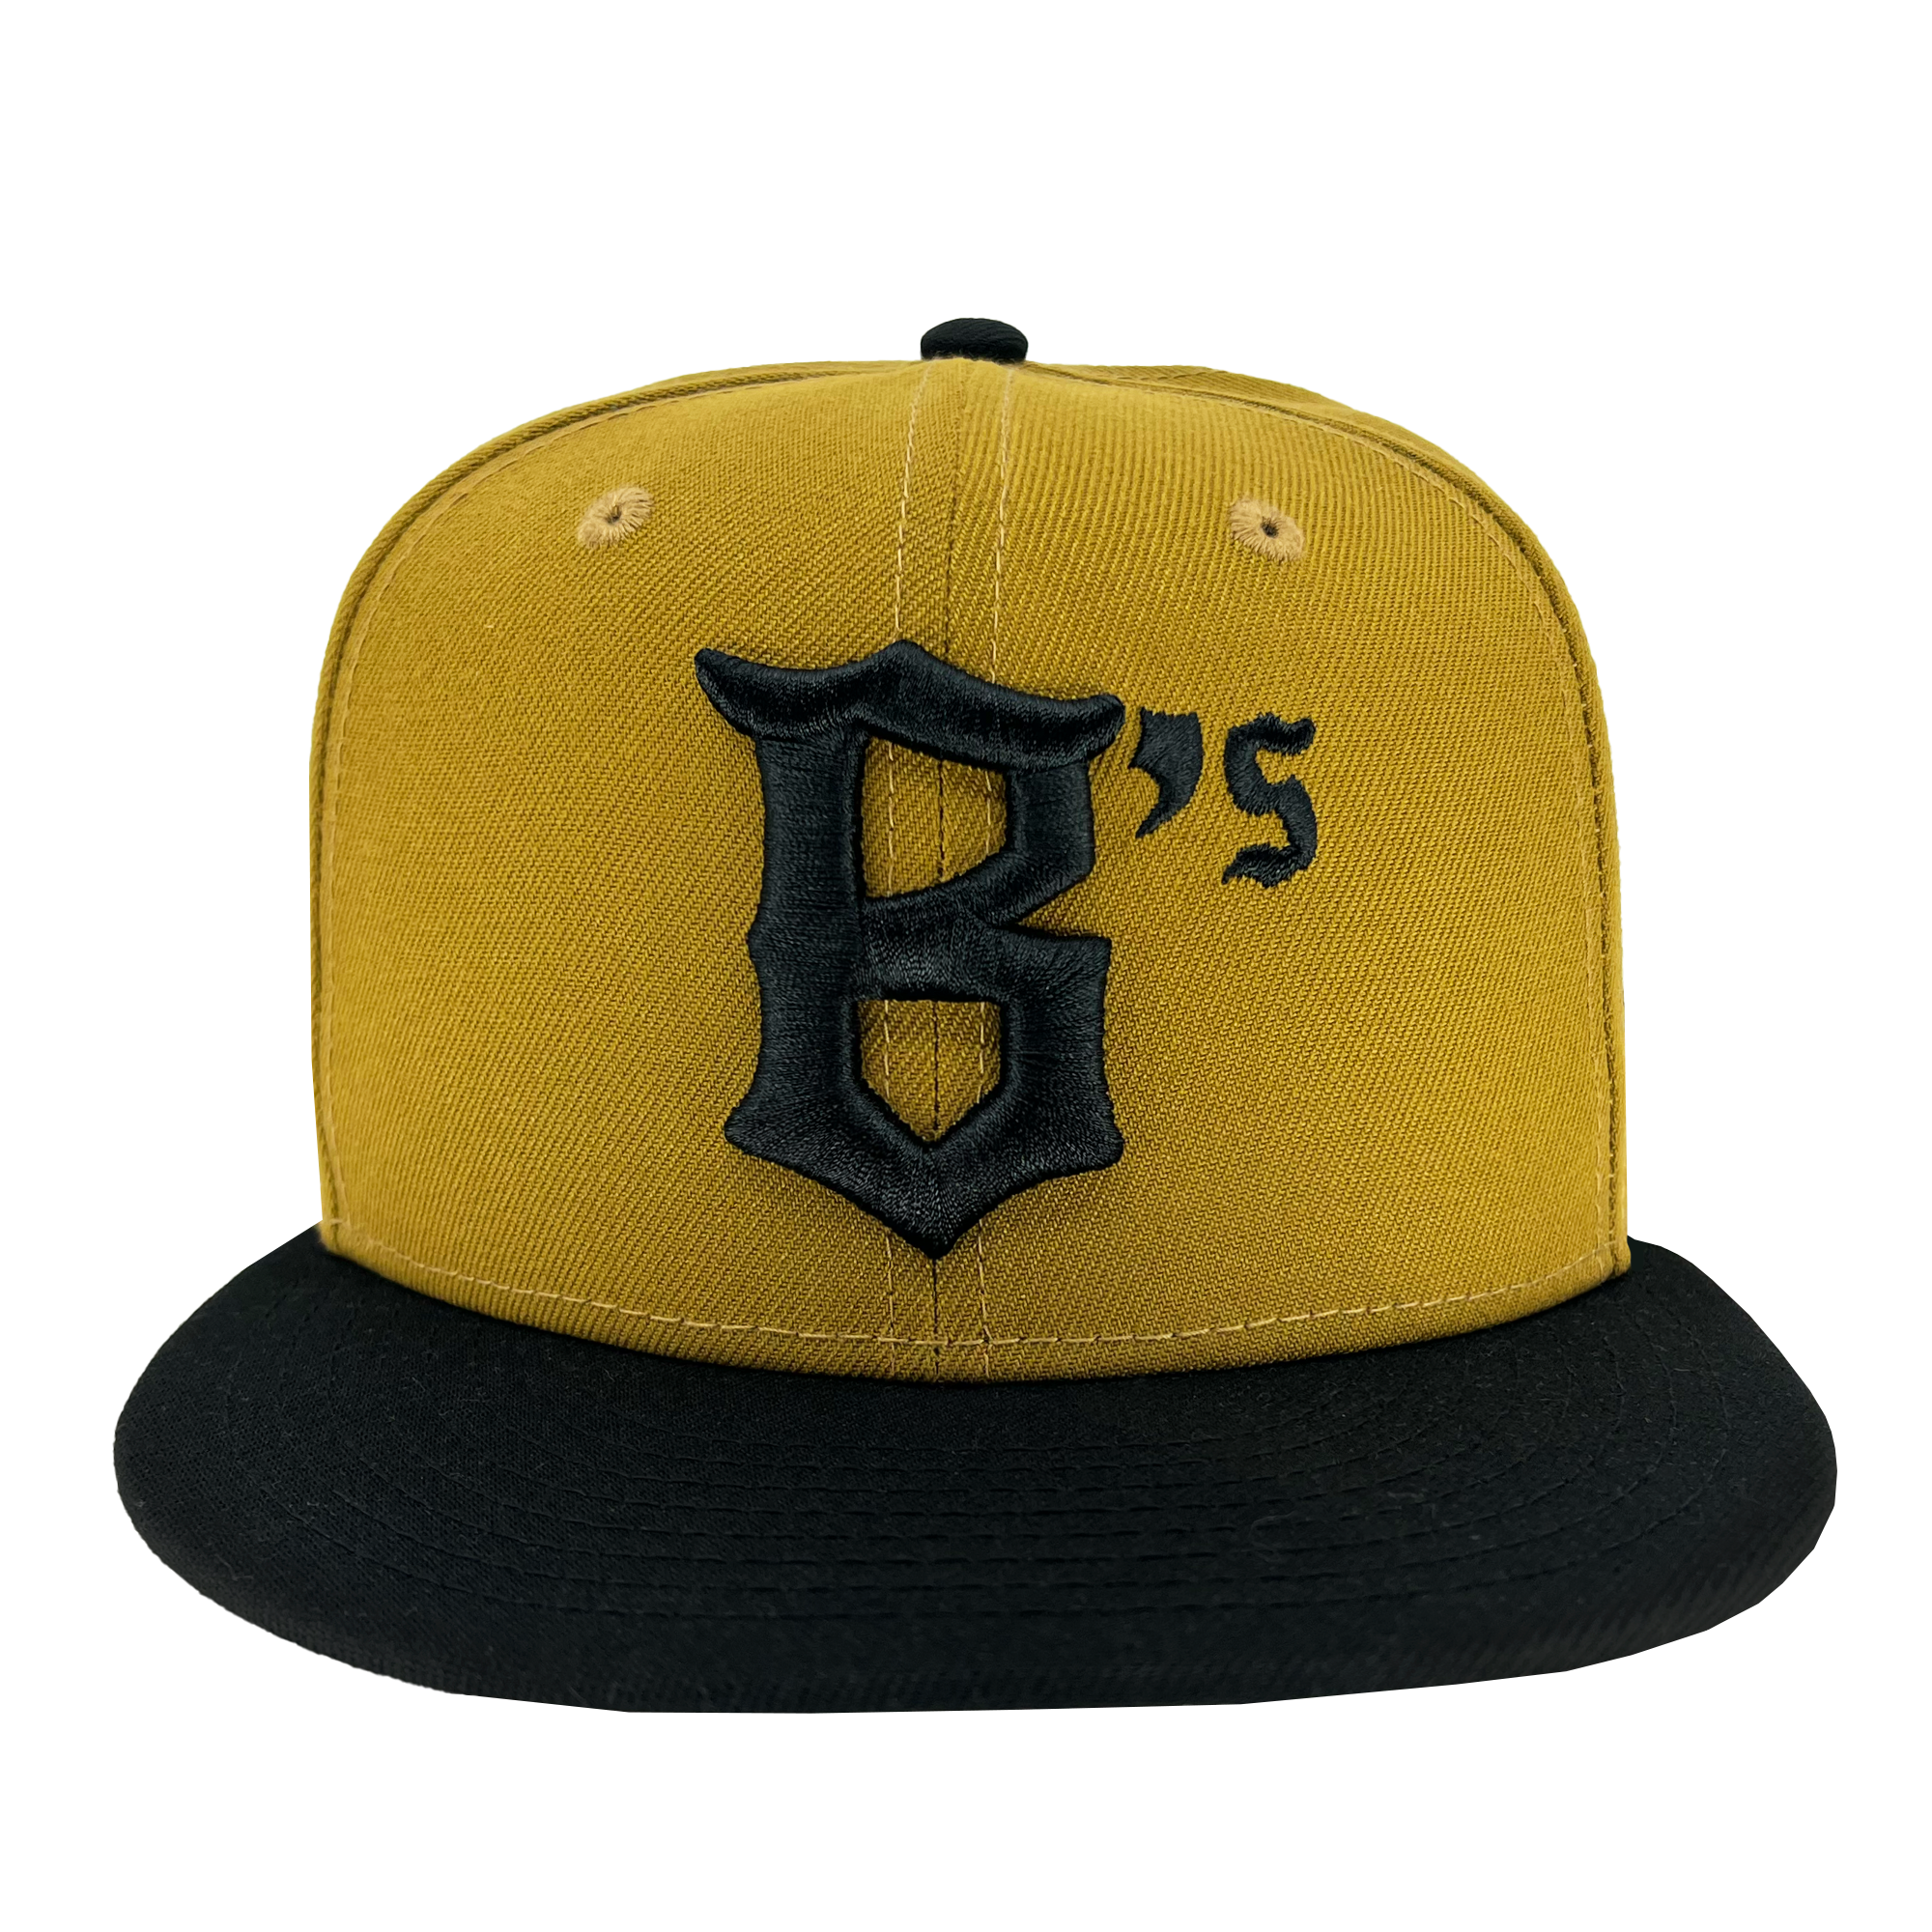 Front view of Gold New Era cap with black embroidered Oakland Ballers baseball logo.